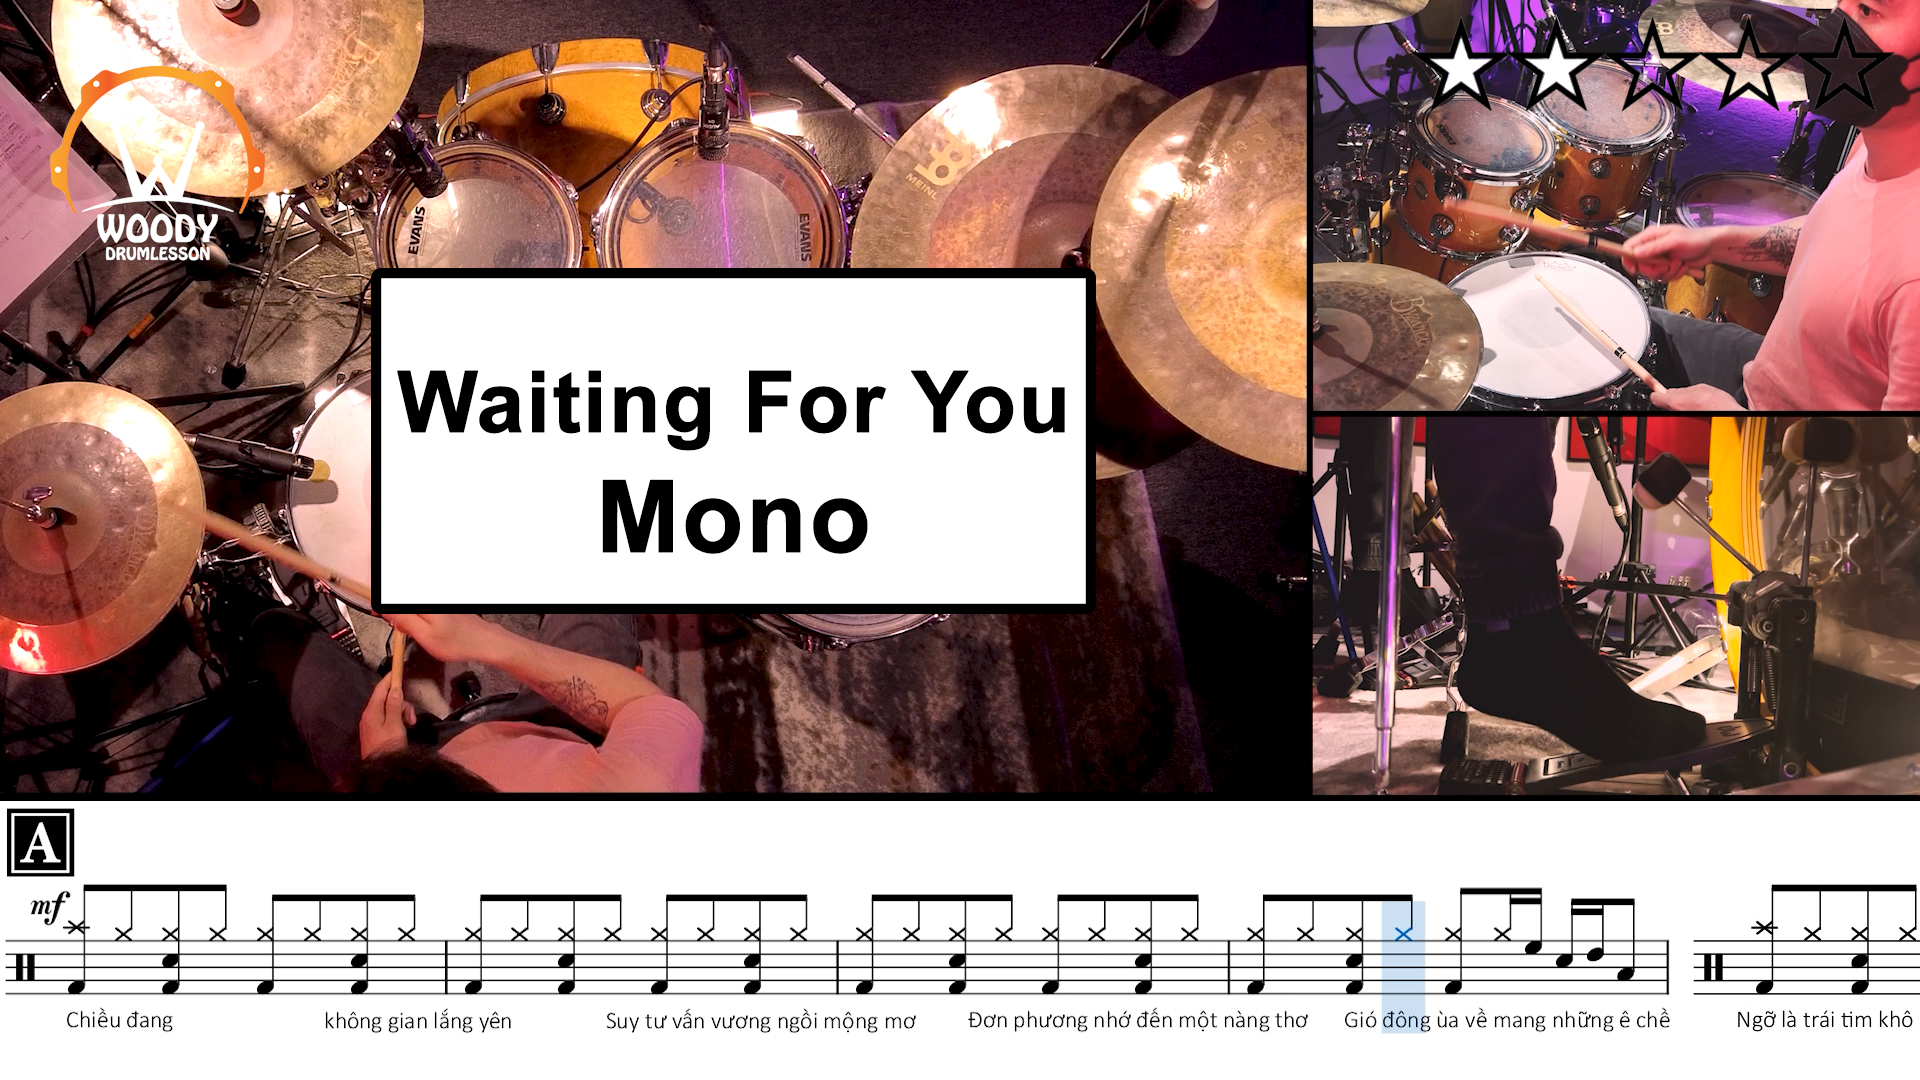 Waiting For You - Mono (★★☆☆☆) | Drum Cover, Score, Sheet Music, Lessons, Tutorial